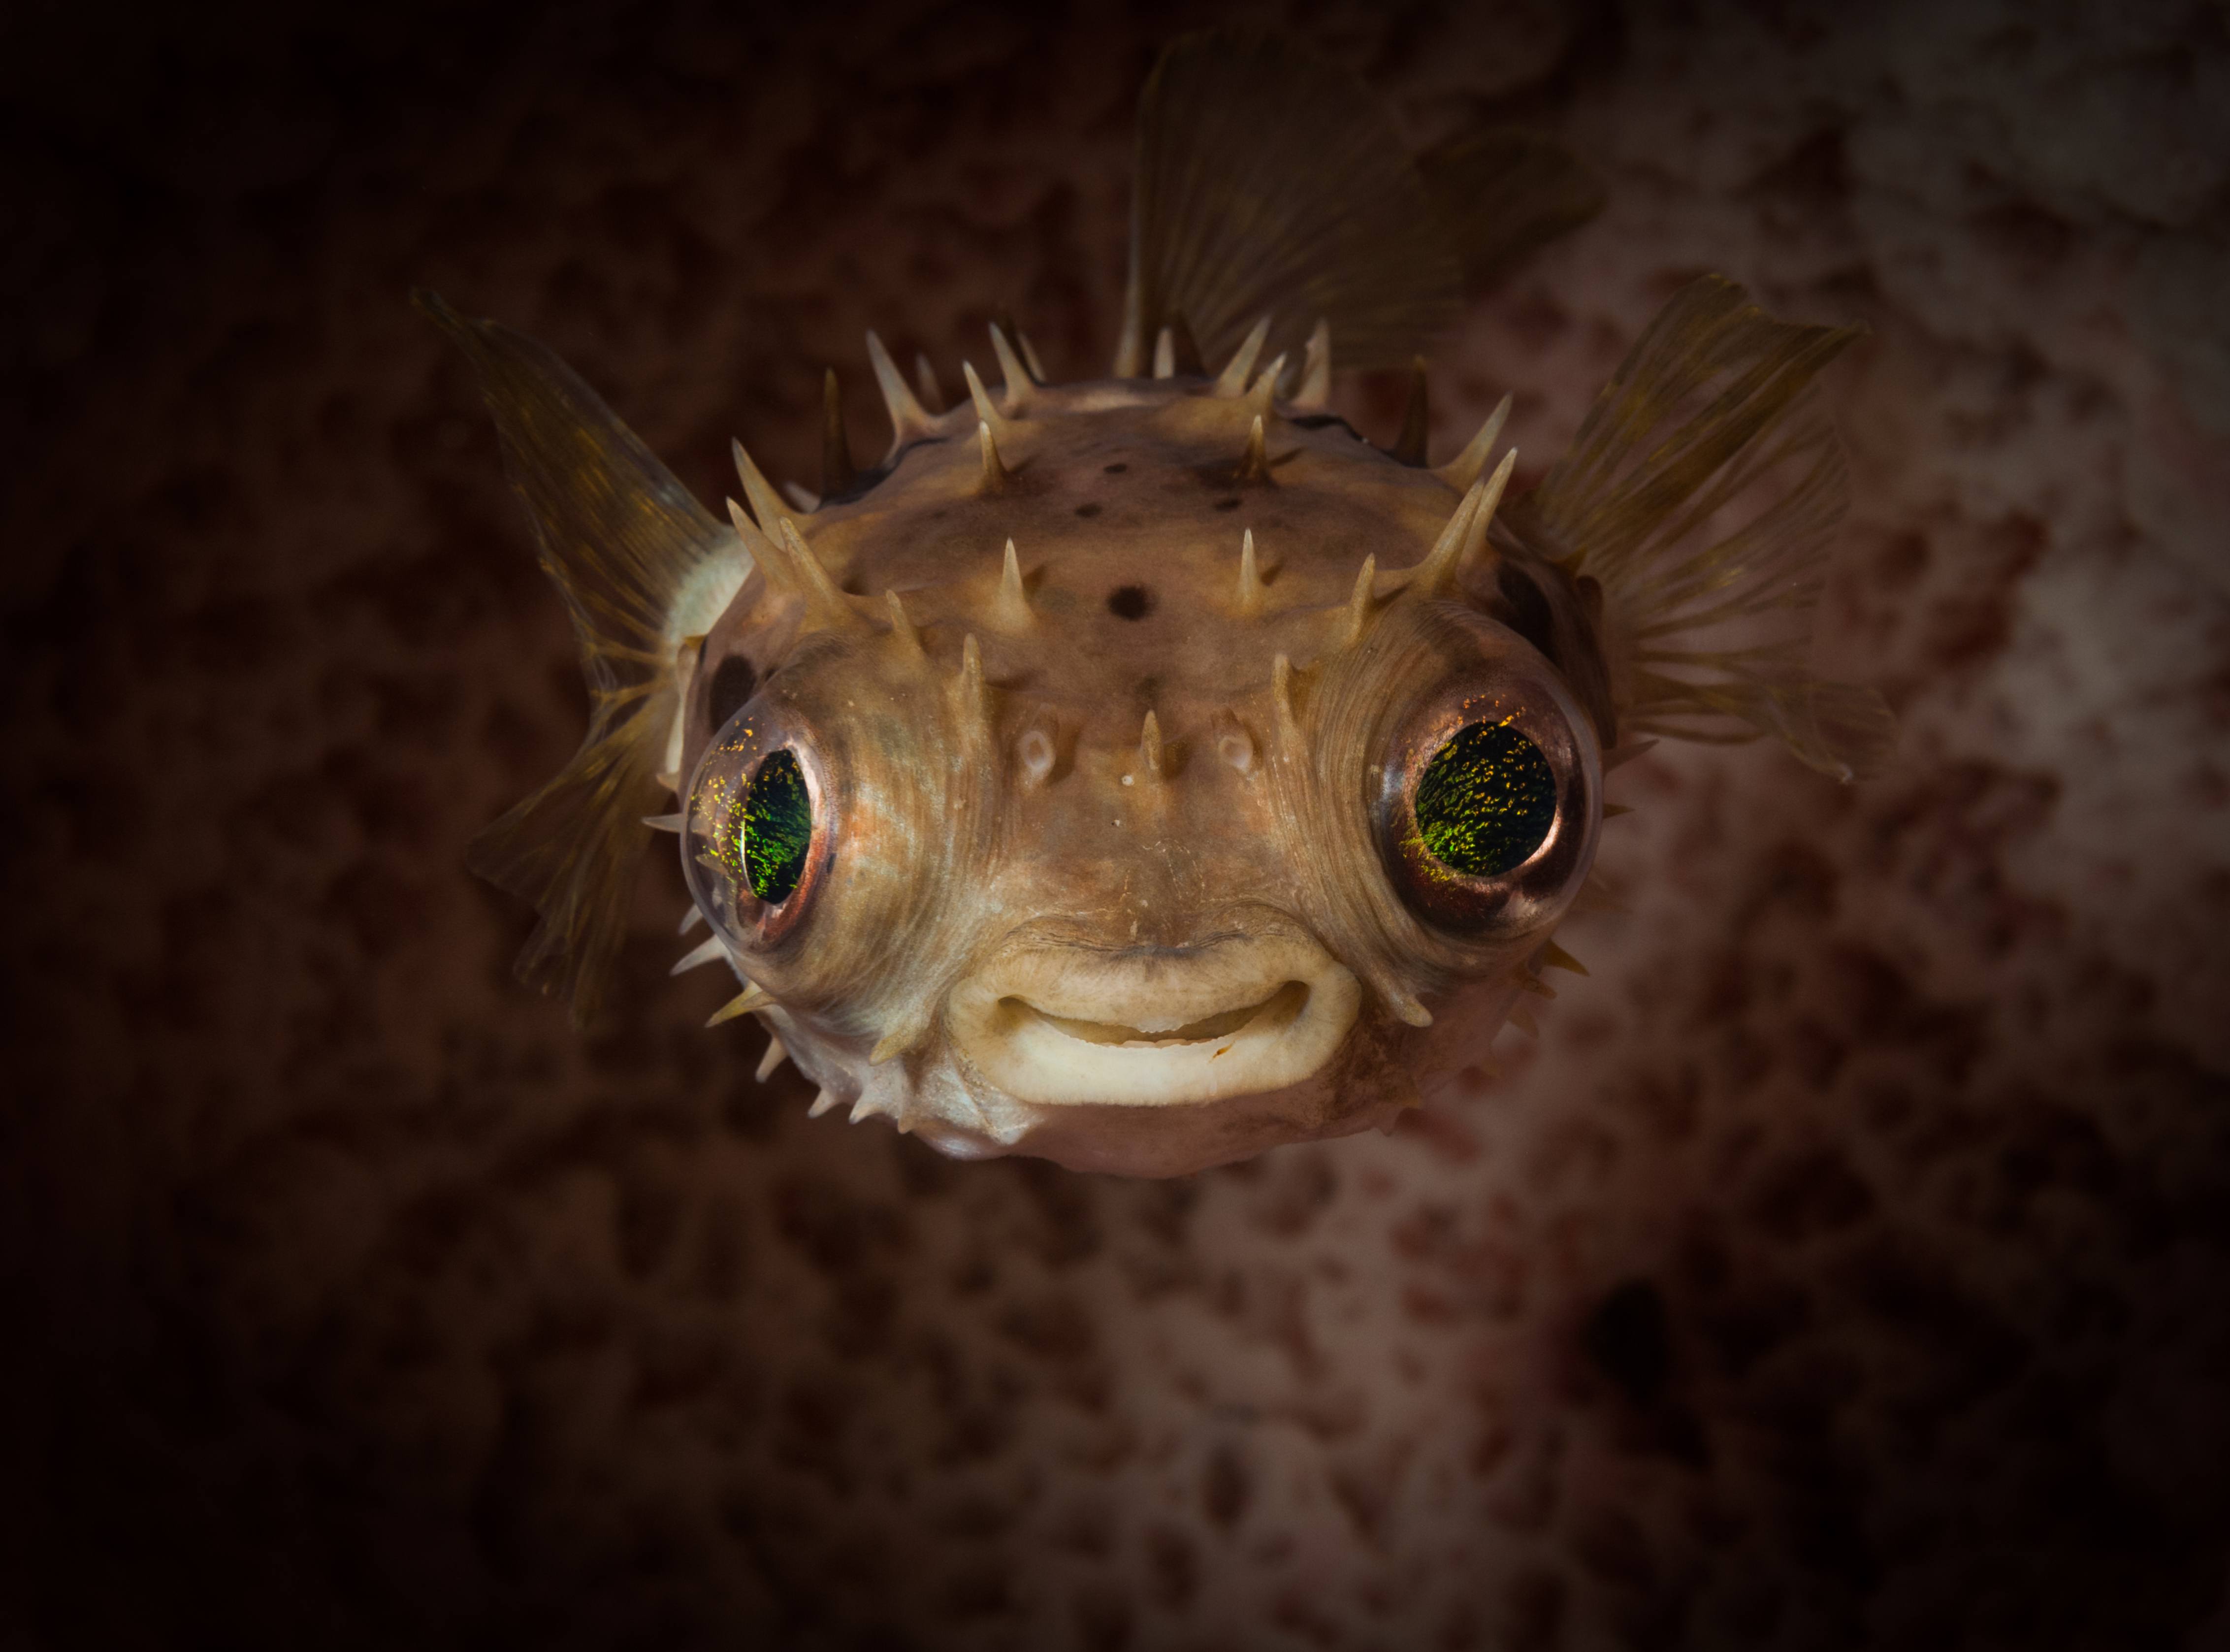 blow-fish-smiling_shutterstock_timsimages.uk_-scaled.jpg